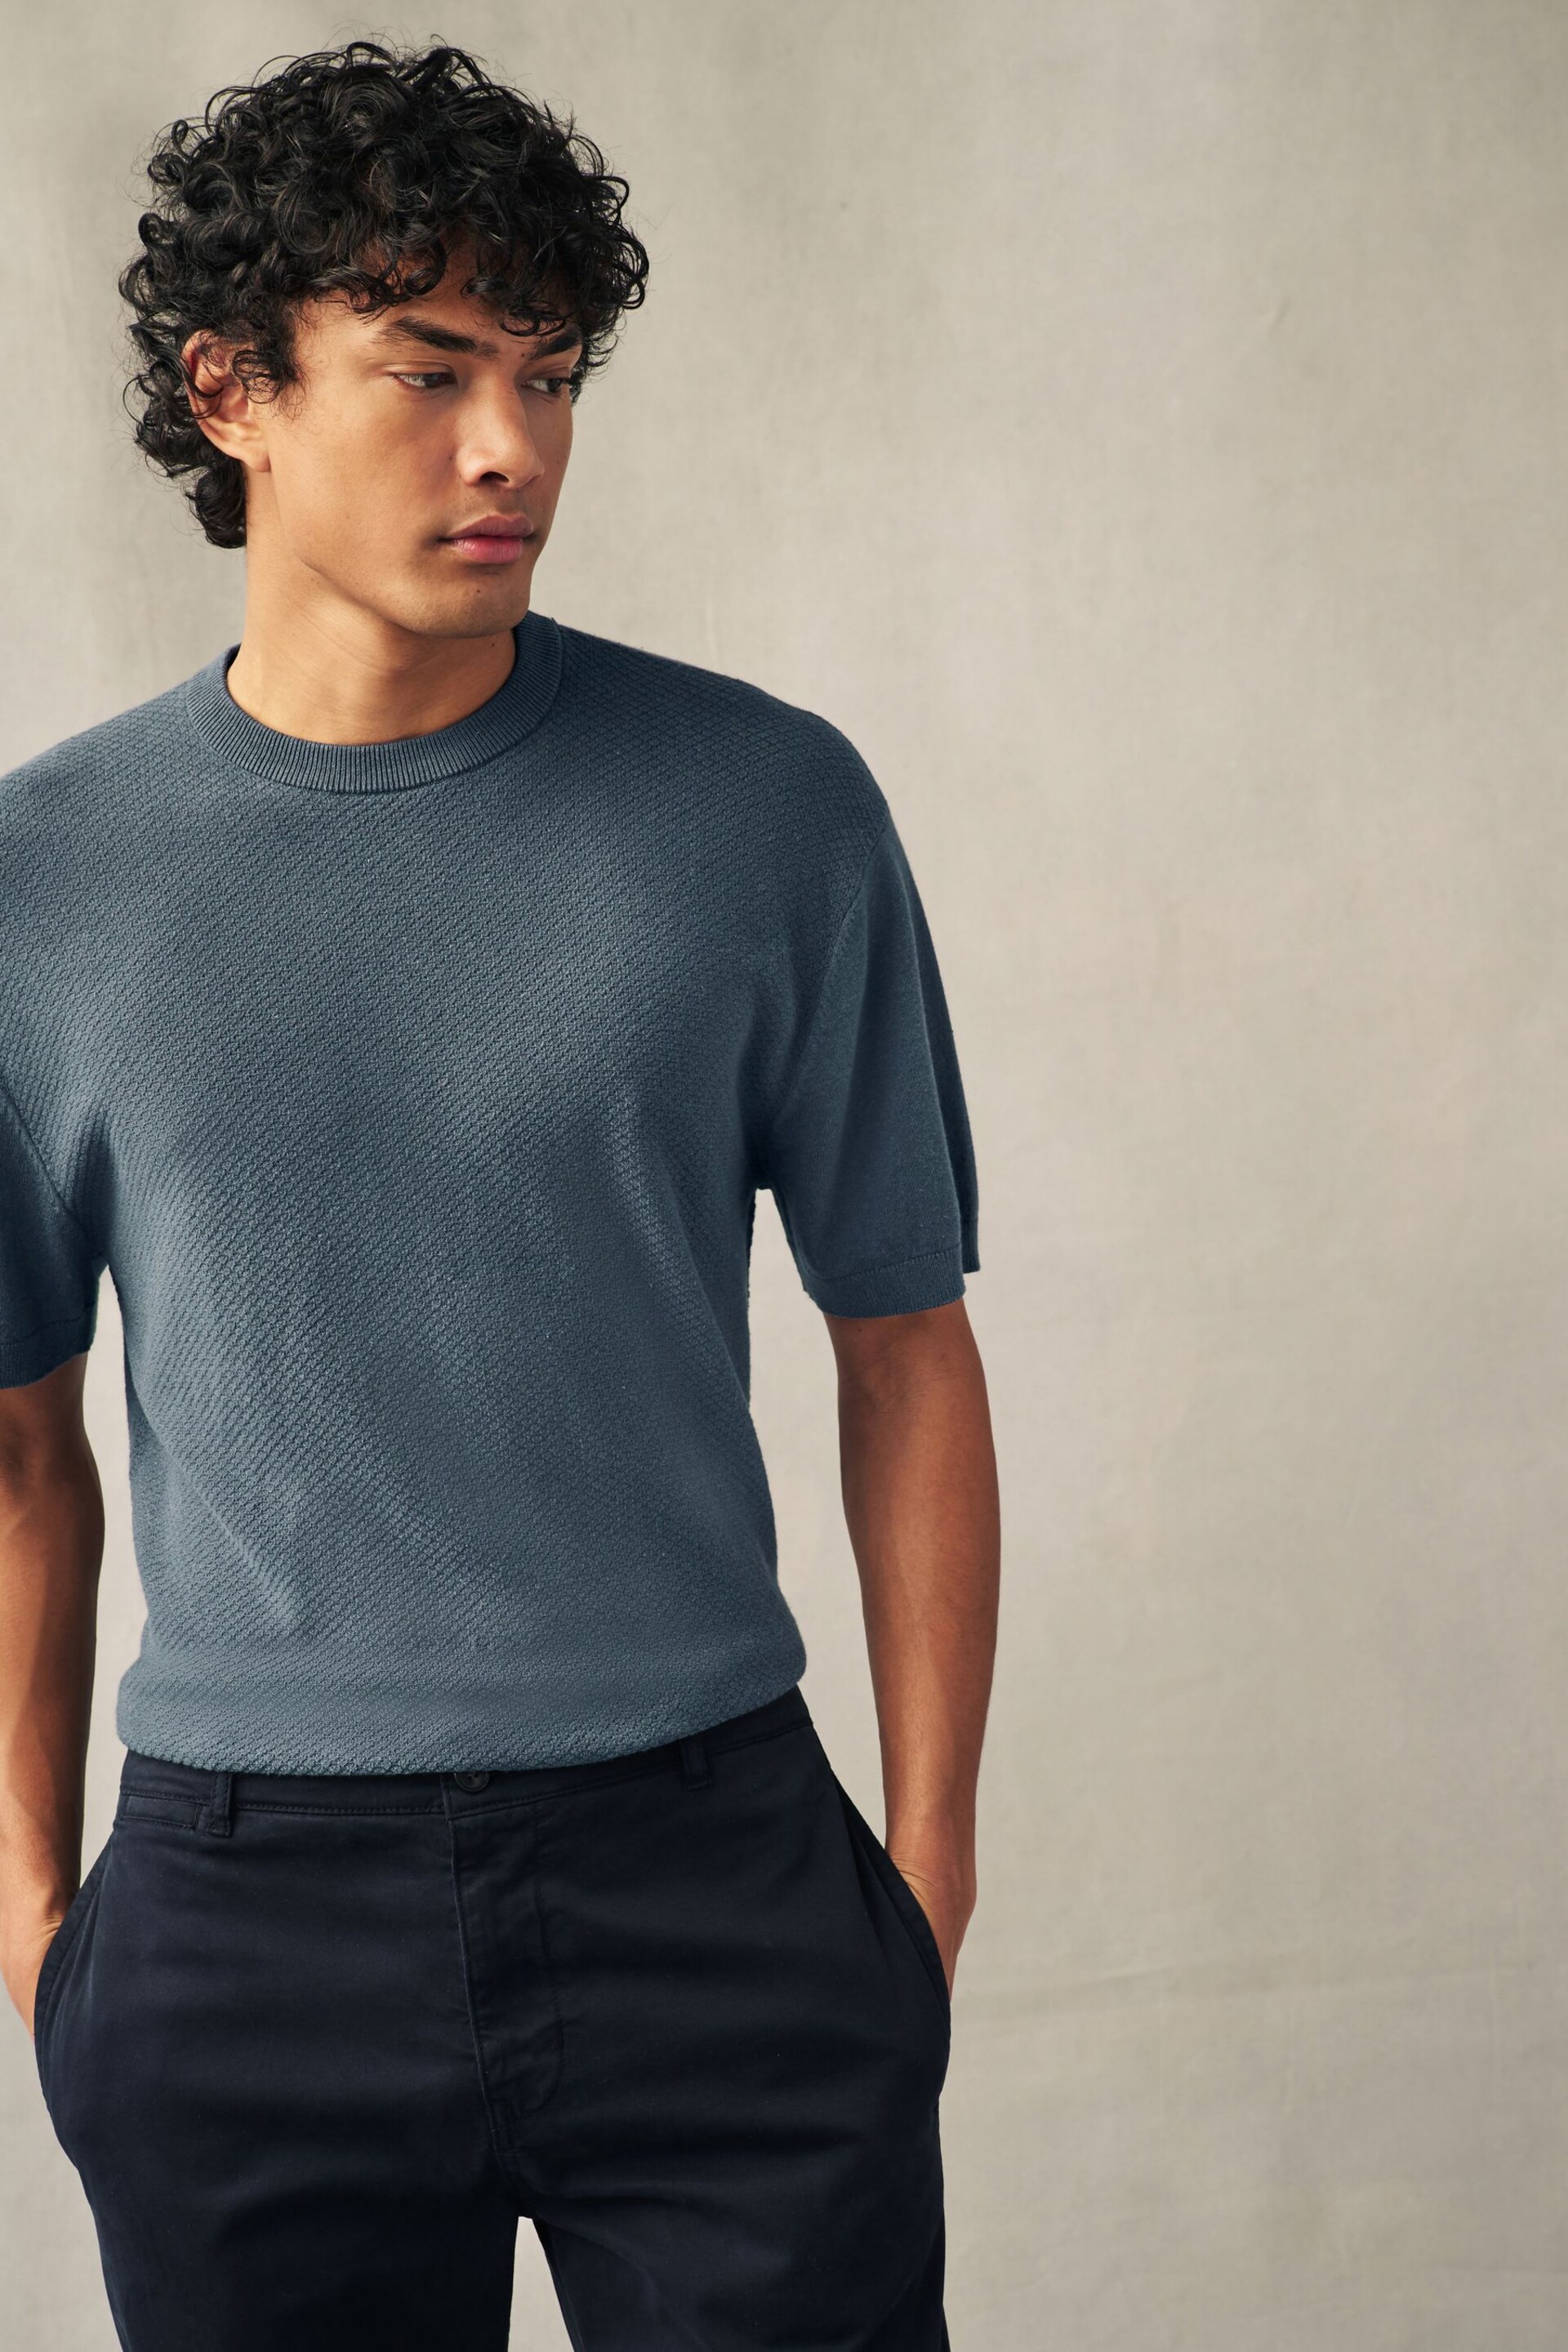 Slate Grey Knitted Textured Regular Fit T-Shirt - Image 1 of 7